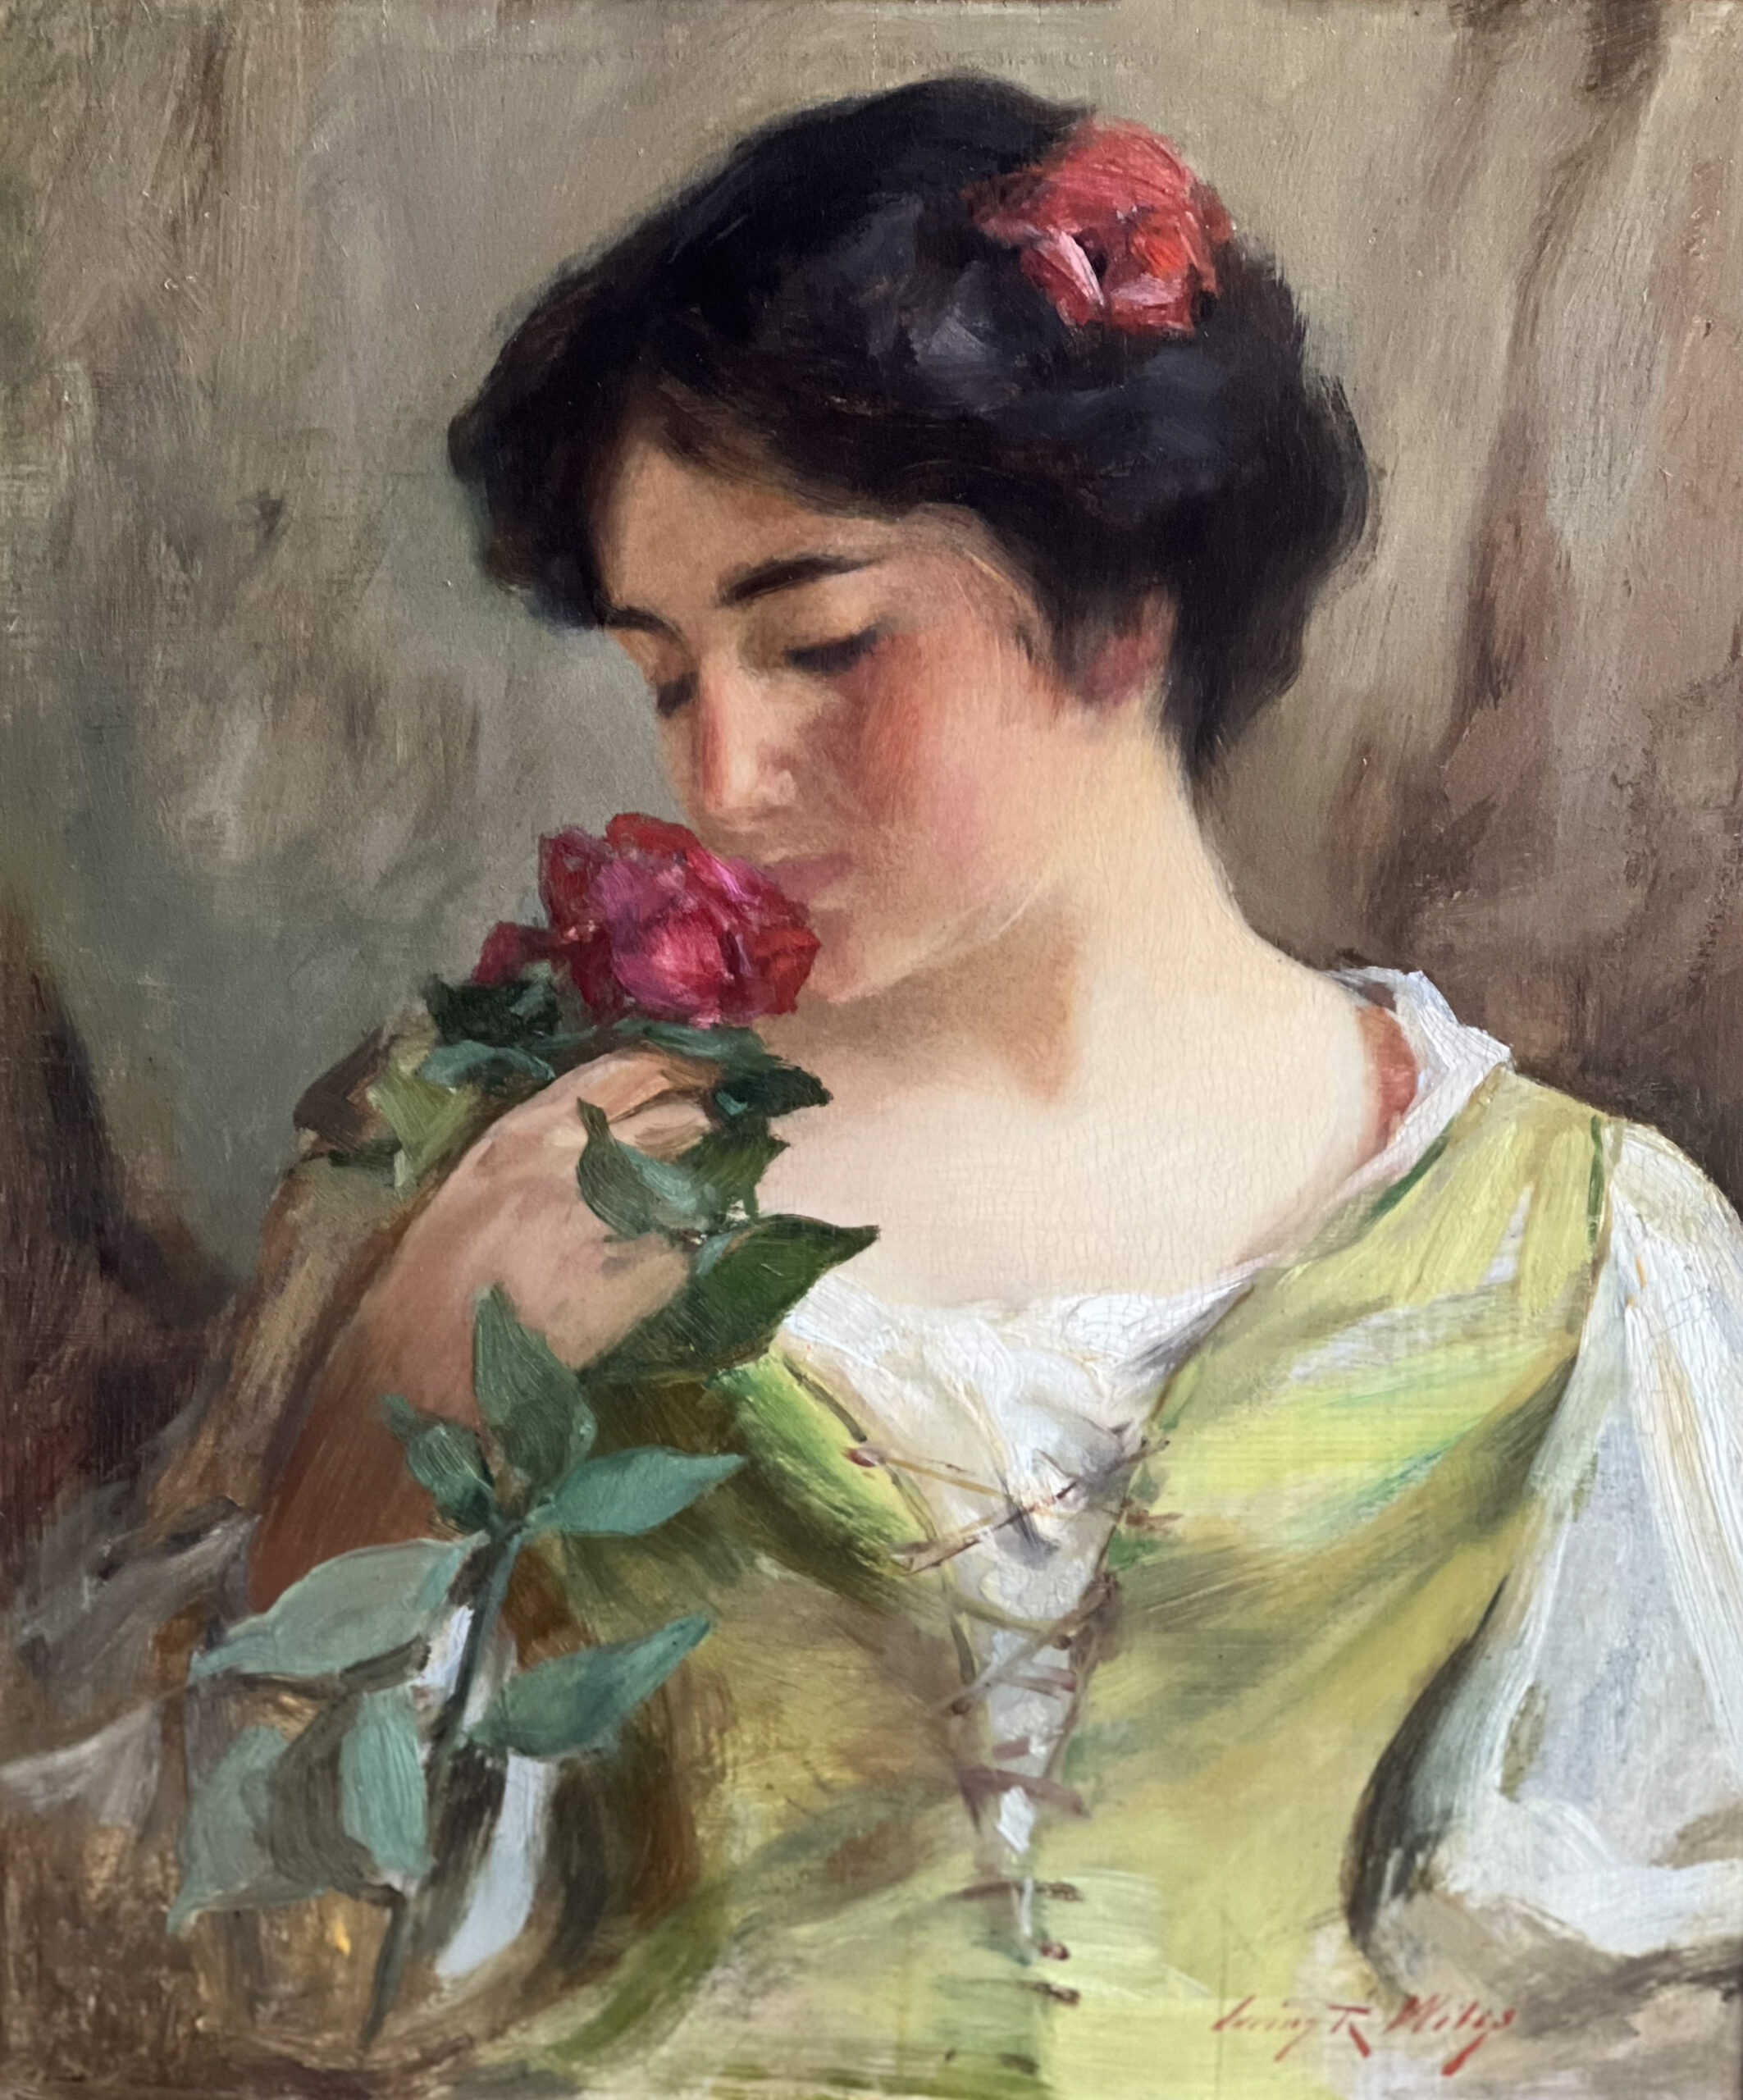 Visit Wiles - A young lady with short dark hair in a white blouse under a green laced corset smells a red rose. There is another red rose in her hair.